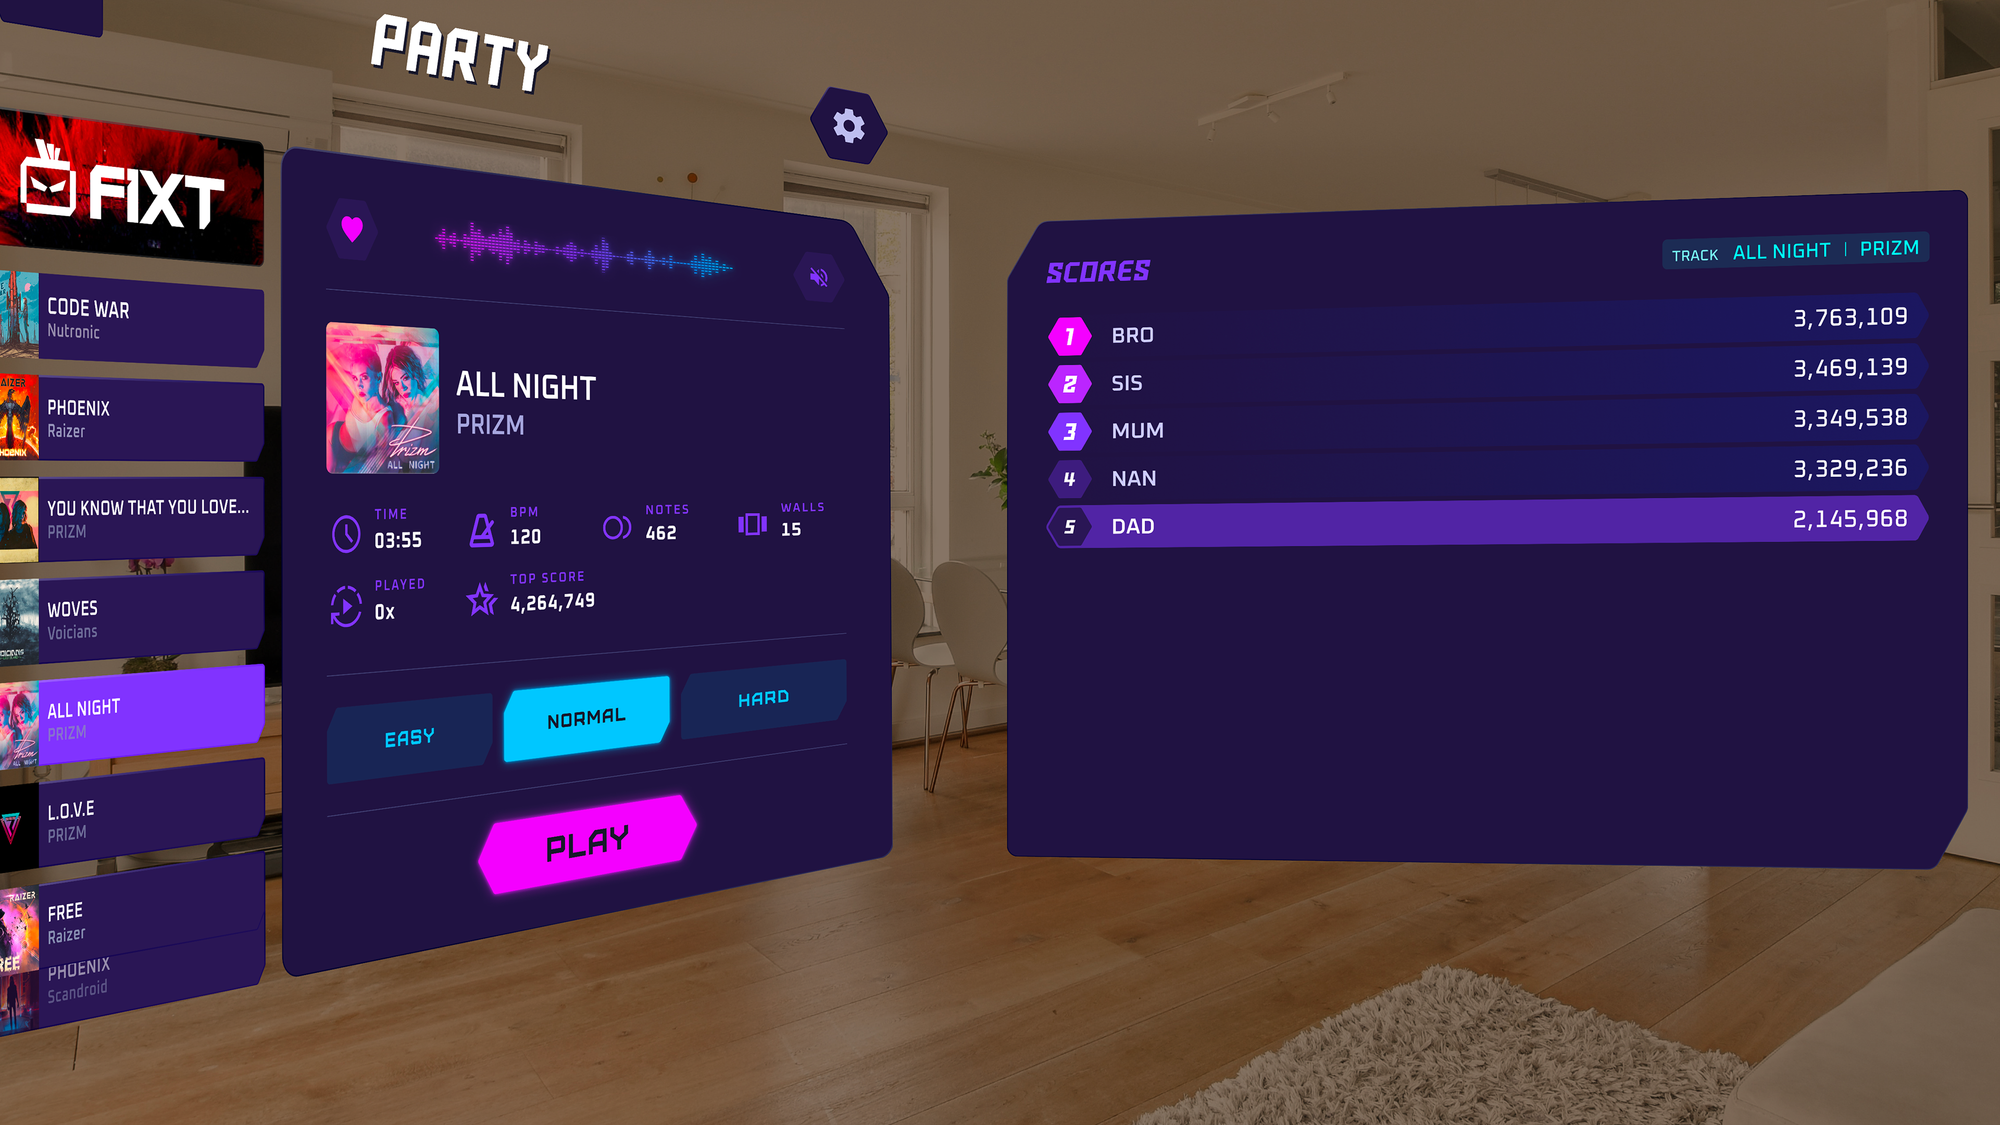 Synth Riders Will Add A Local Party Mode On Apple Vision Pro